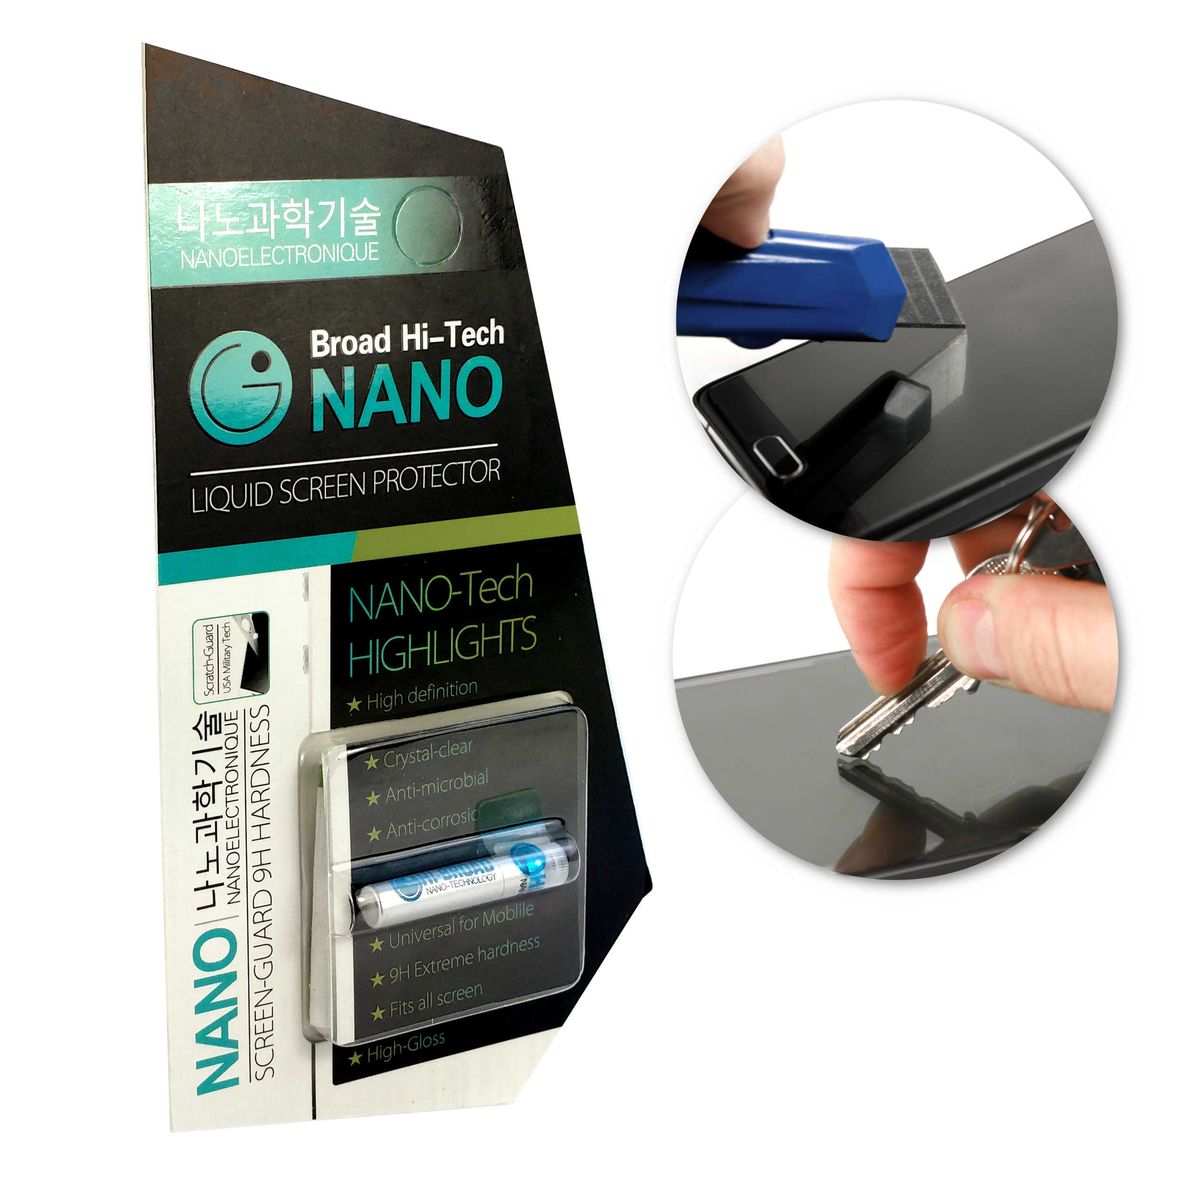 Tuff-luv Nano Liquid Screen Protector For All Smartphones | Buy Online in South Africa ...1200 x 1200